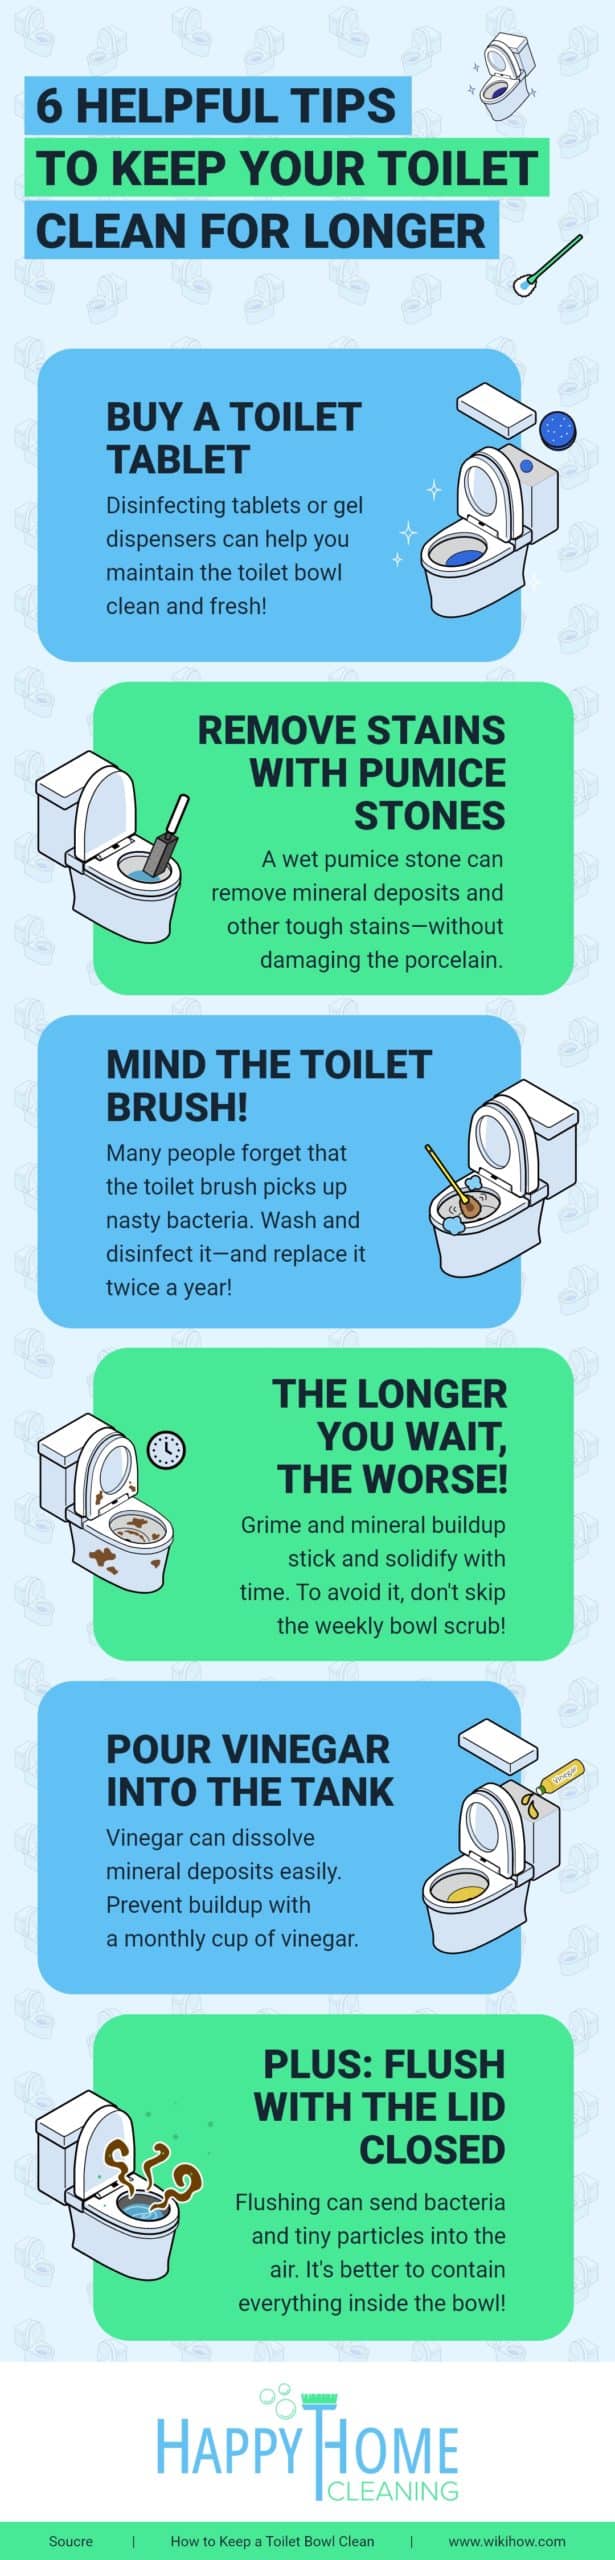 https://happyhometampa.com/wp-content/uploads/2022/02/Happy-Home-Cleaning-Services-6-Helpful-Tips-To-Keep-Your-Toilet-Clean-For-Longer-scaled.jpg